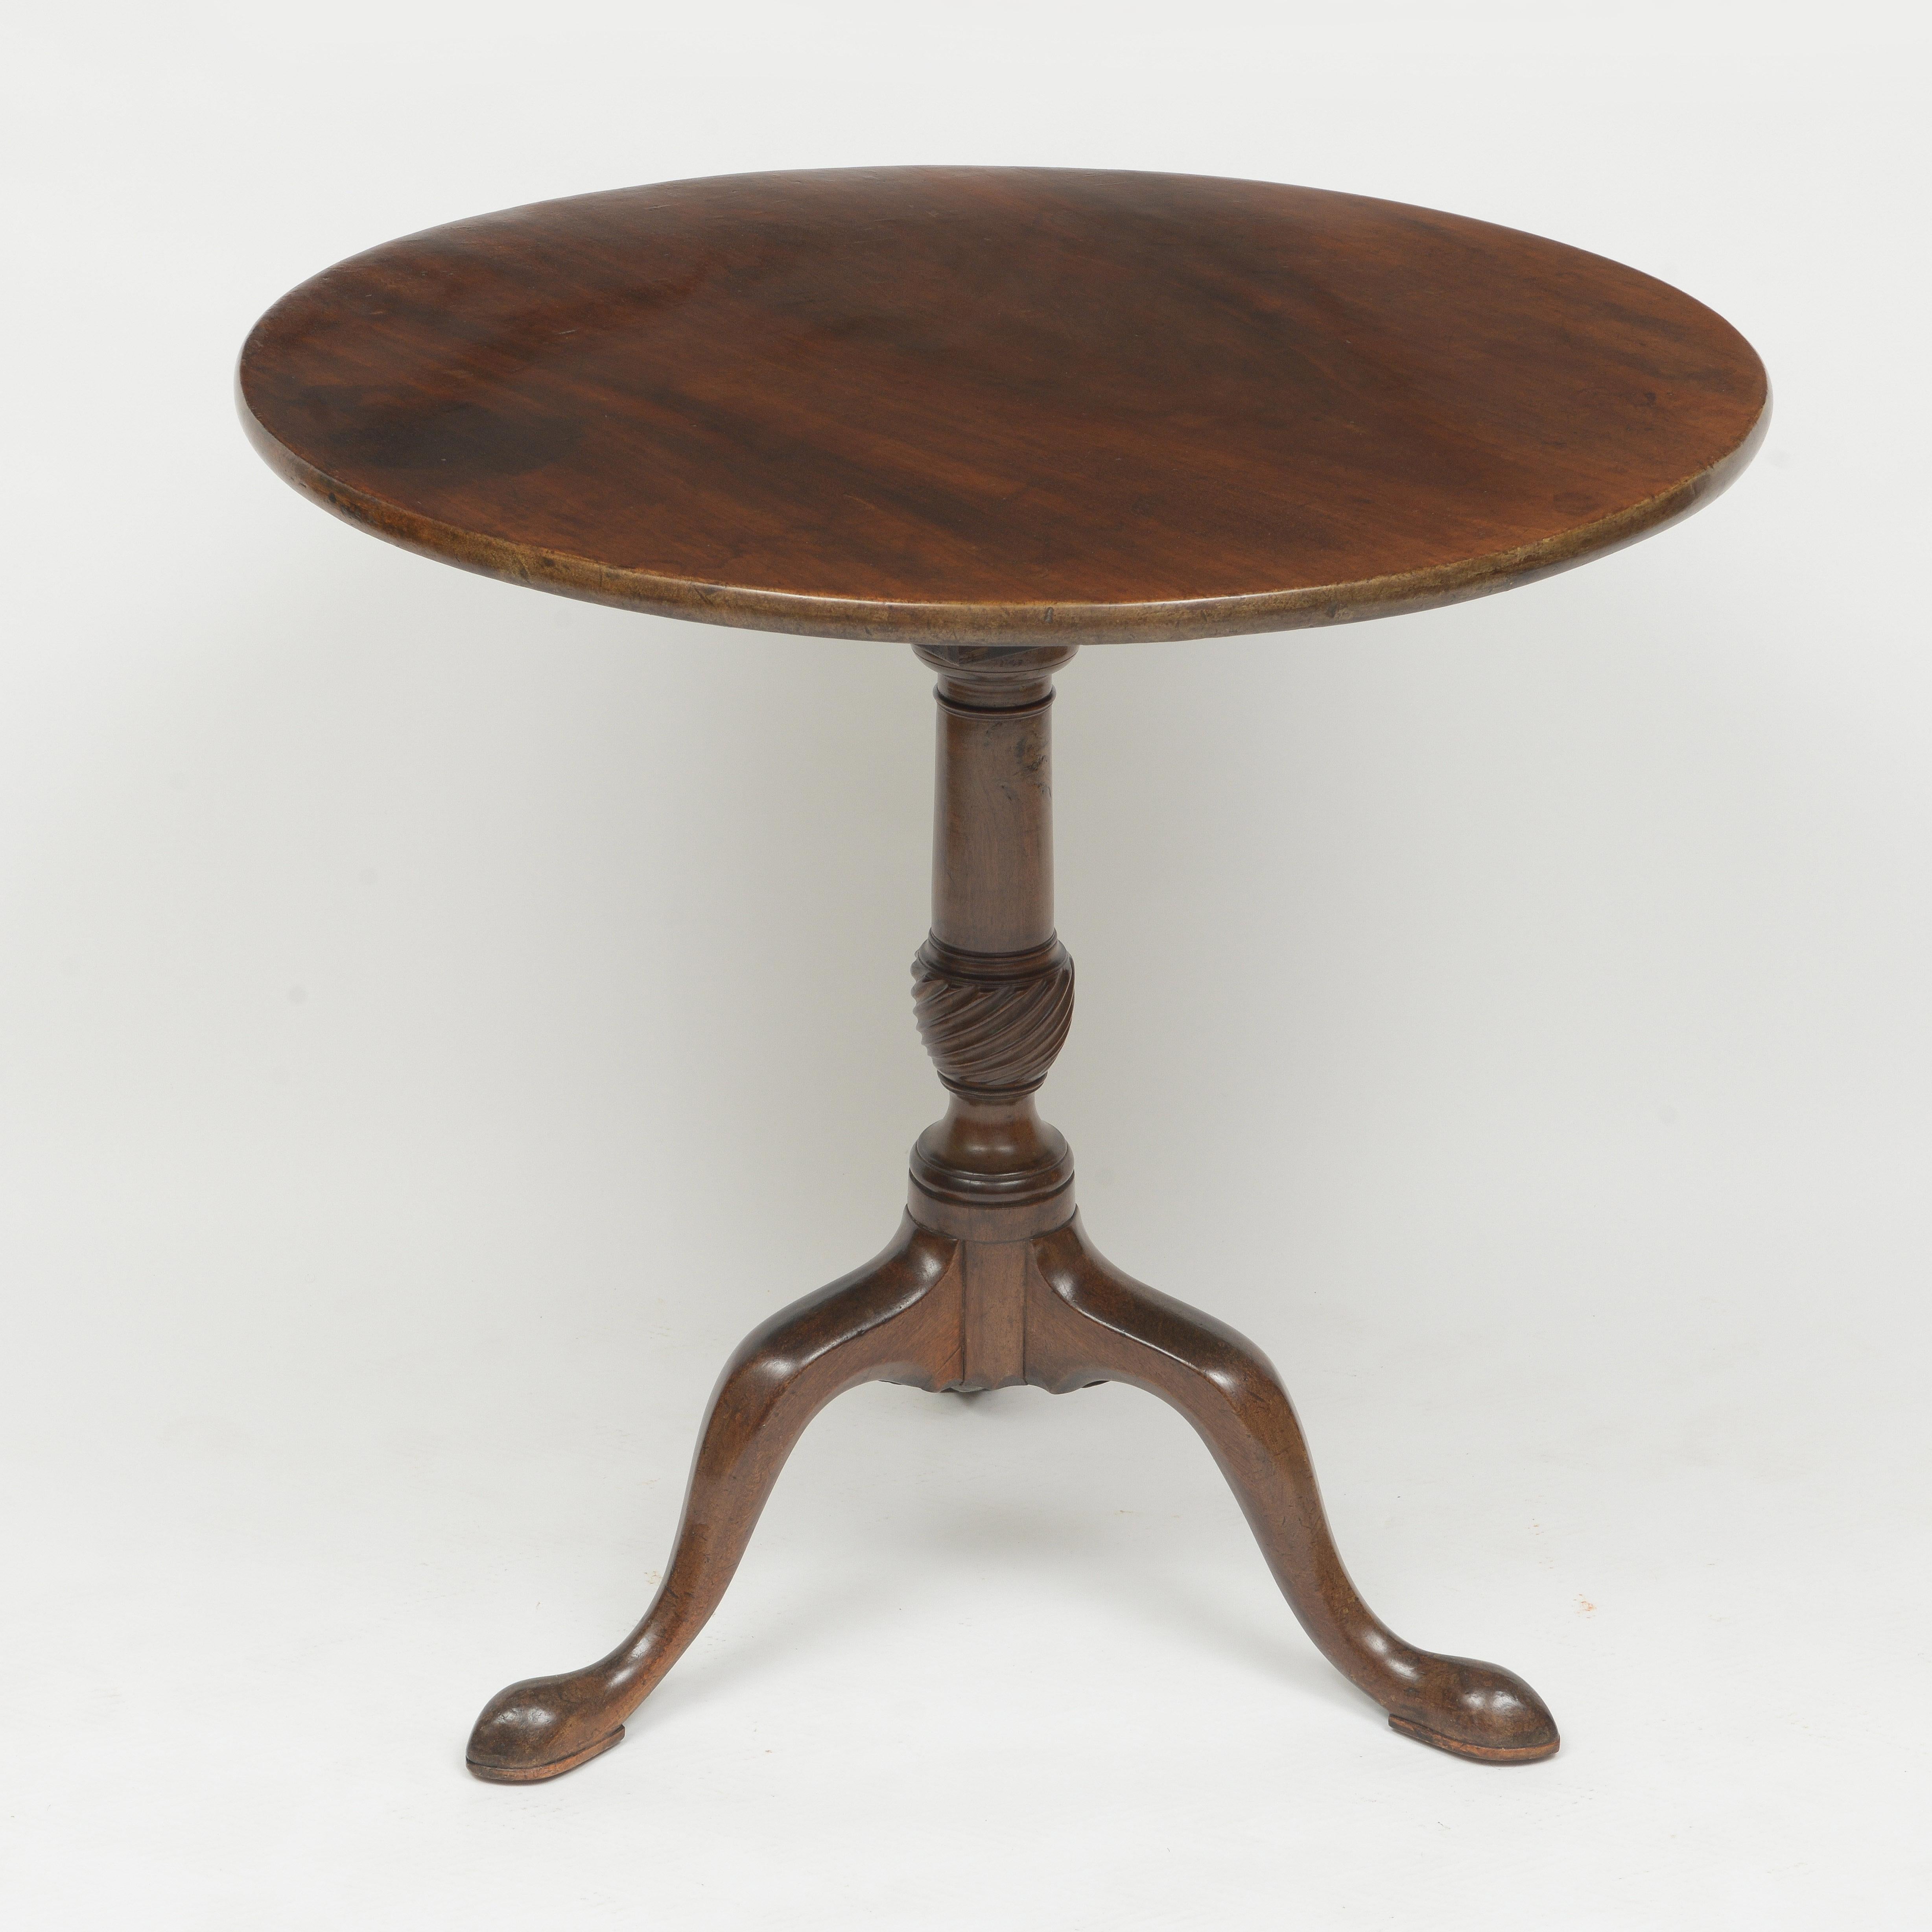 Round Top Tripod Table in Walnut Finished With Shellac and Wax Finish In Good Condition For Sale In Brooklyn, NY